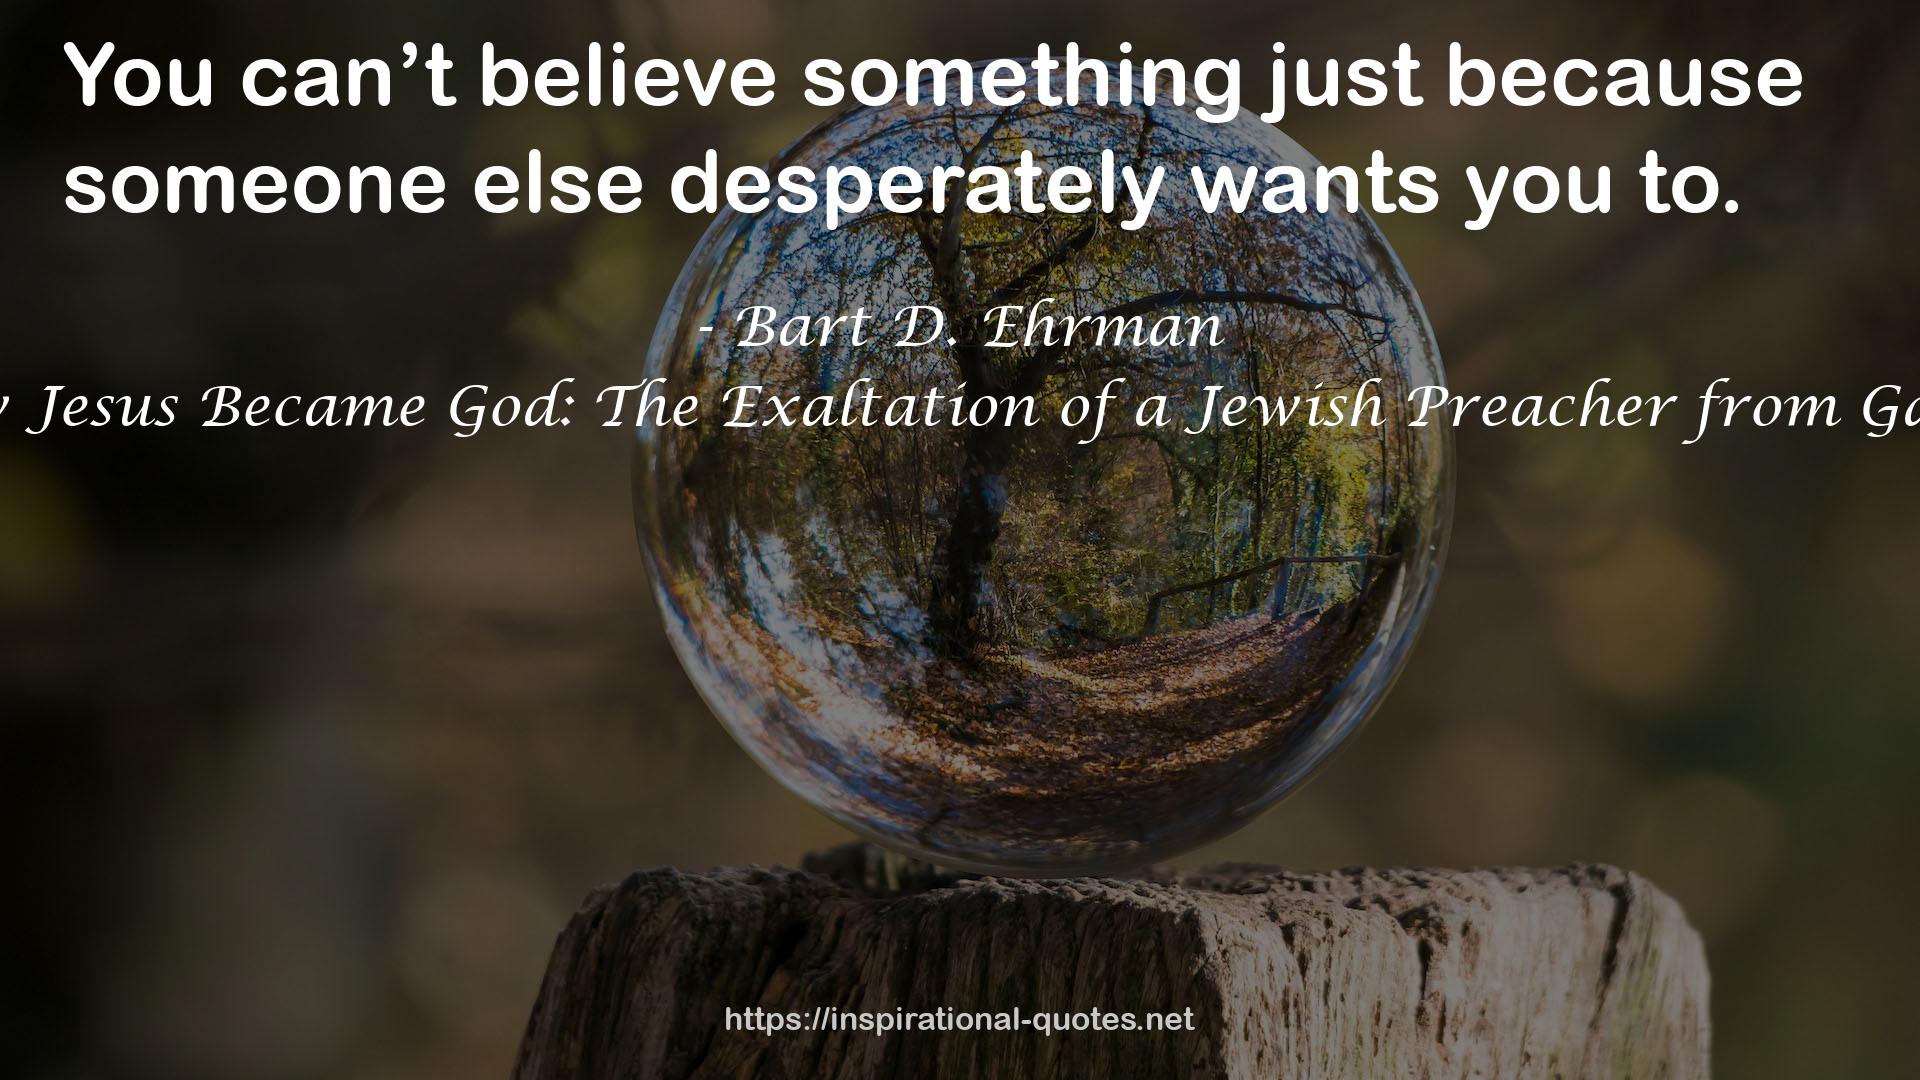 How Jesus Became God: The Exaltation of a Jewish Preacher from Galilee QUOTES